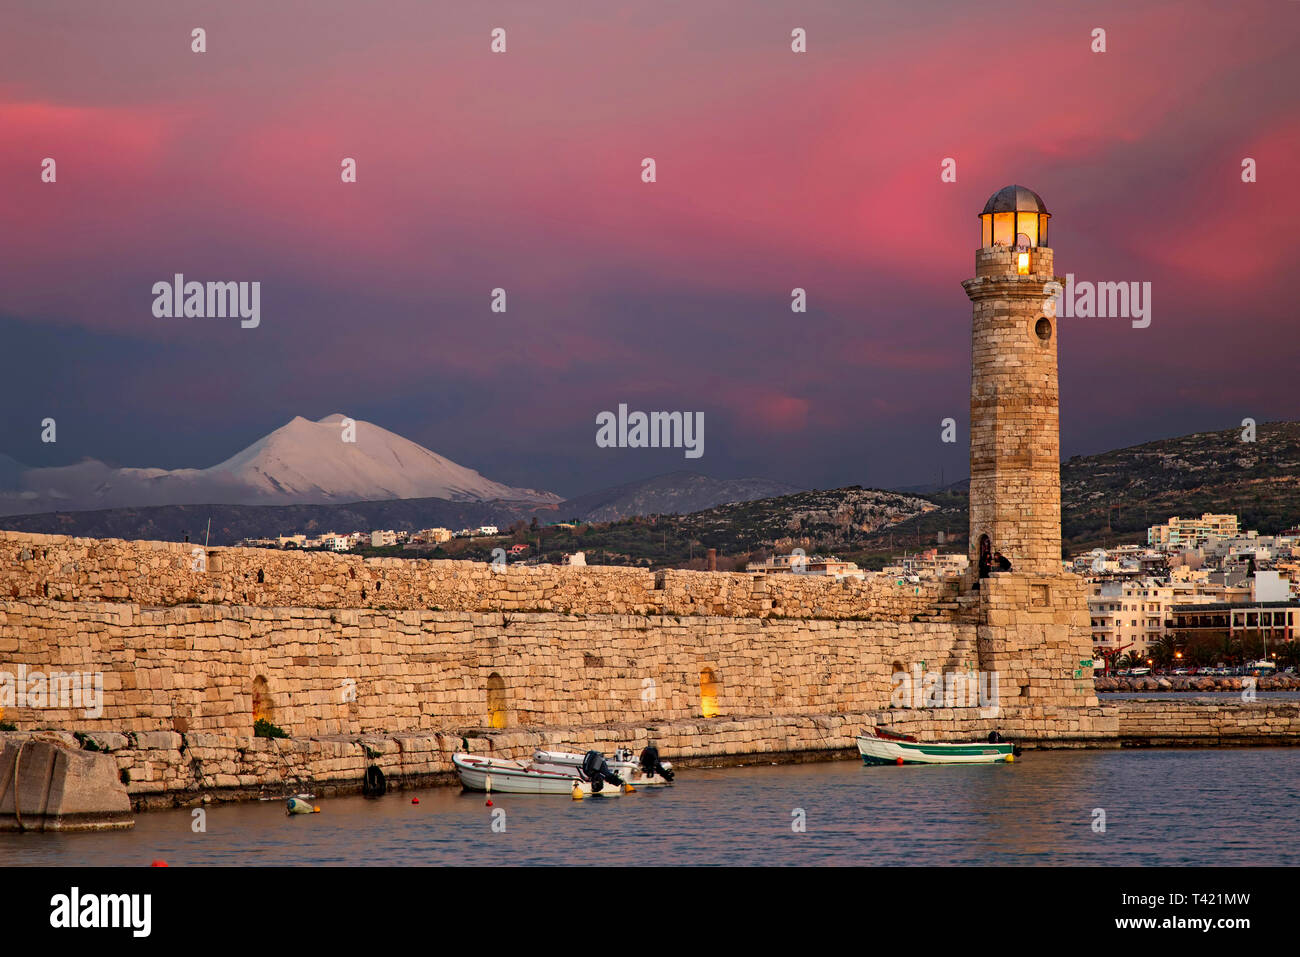 The beautiful lighthouse at the old port of Rethimno town, Crete, Greece. In the background, Psiloritis mountain. Stock Photo